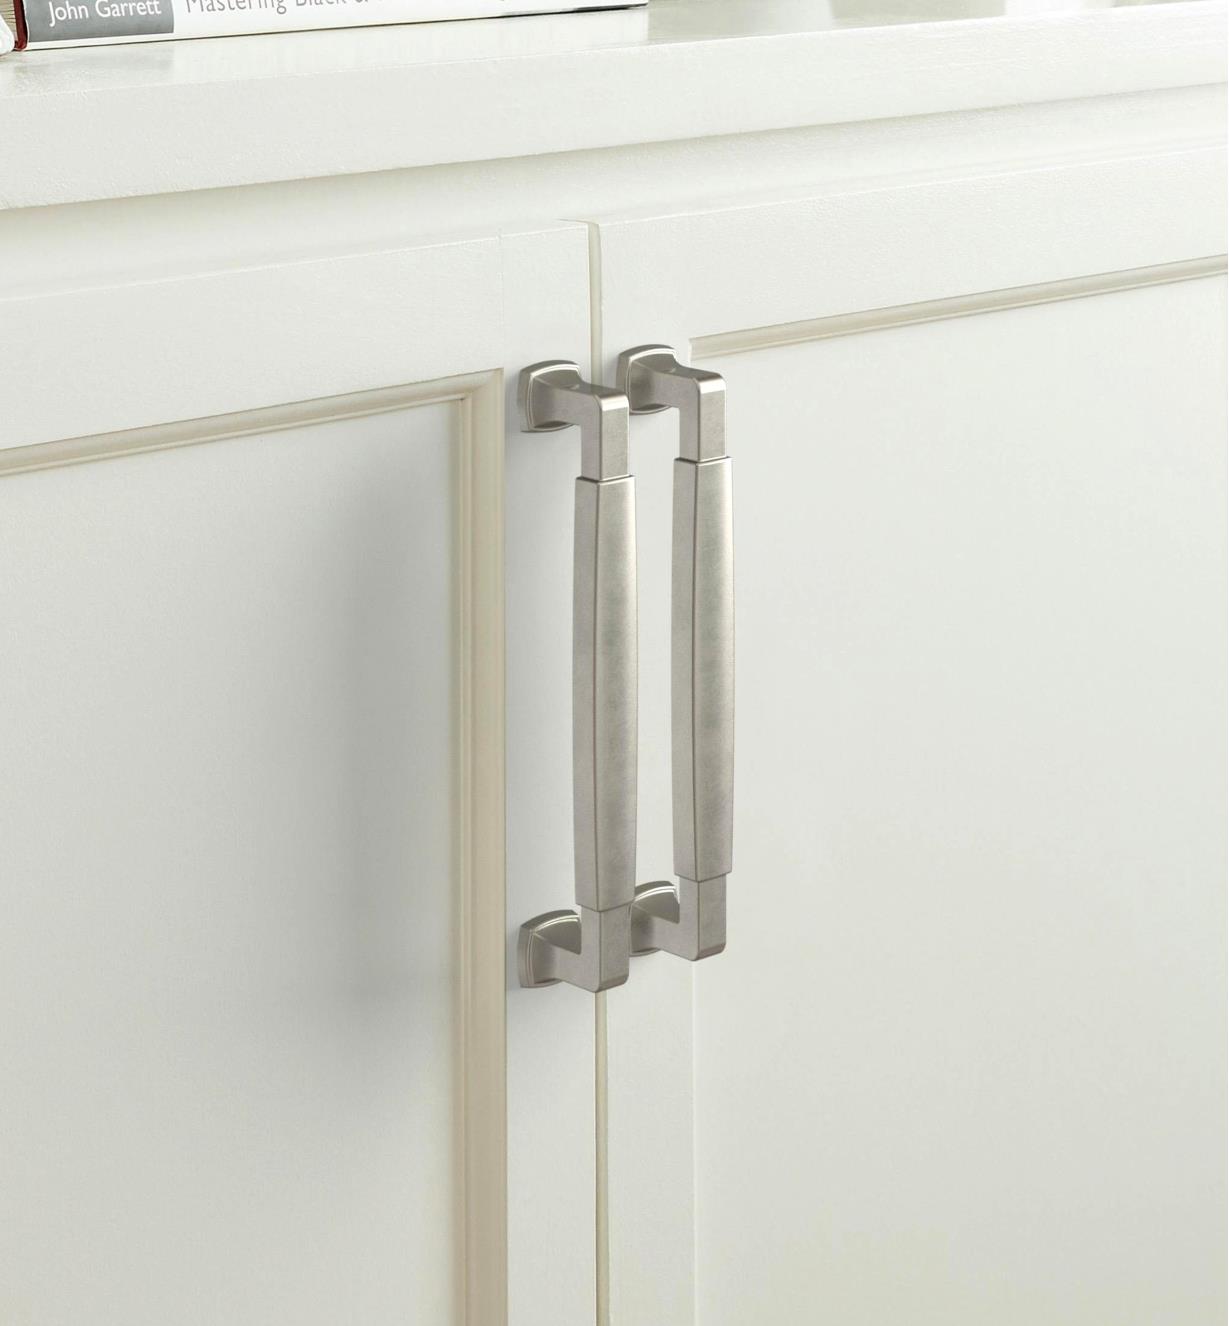 Two satin nickel colored Stature handles are connected vertically to two white colored cupboard doors